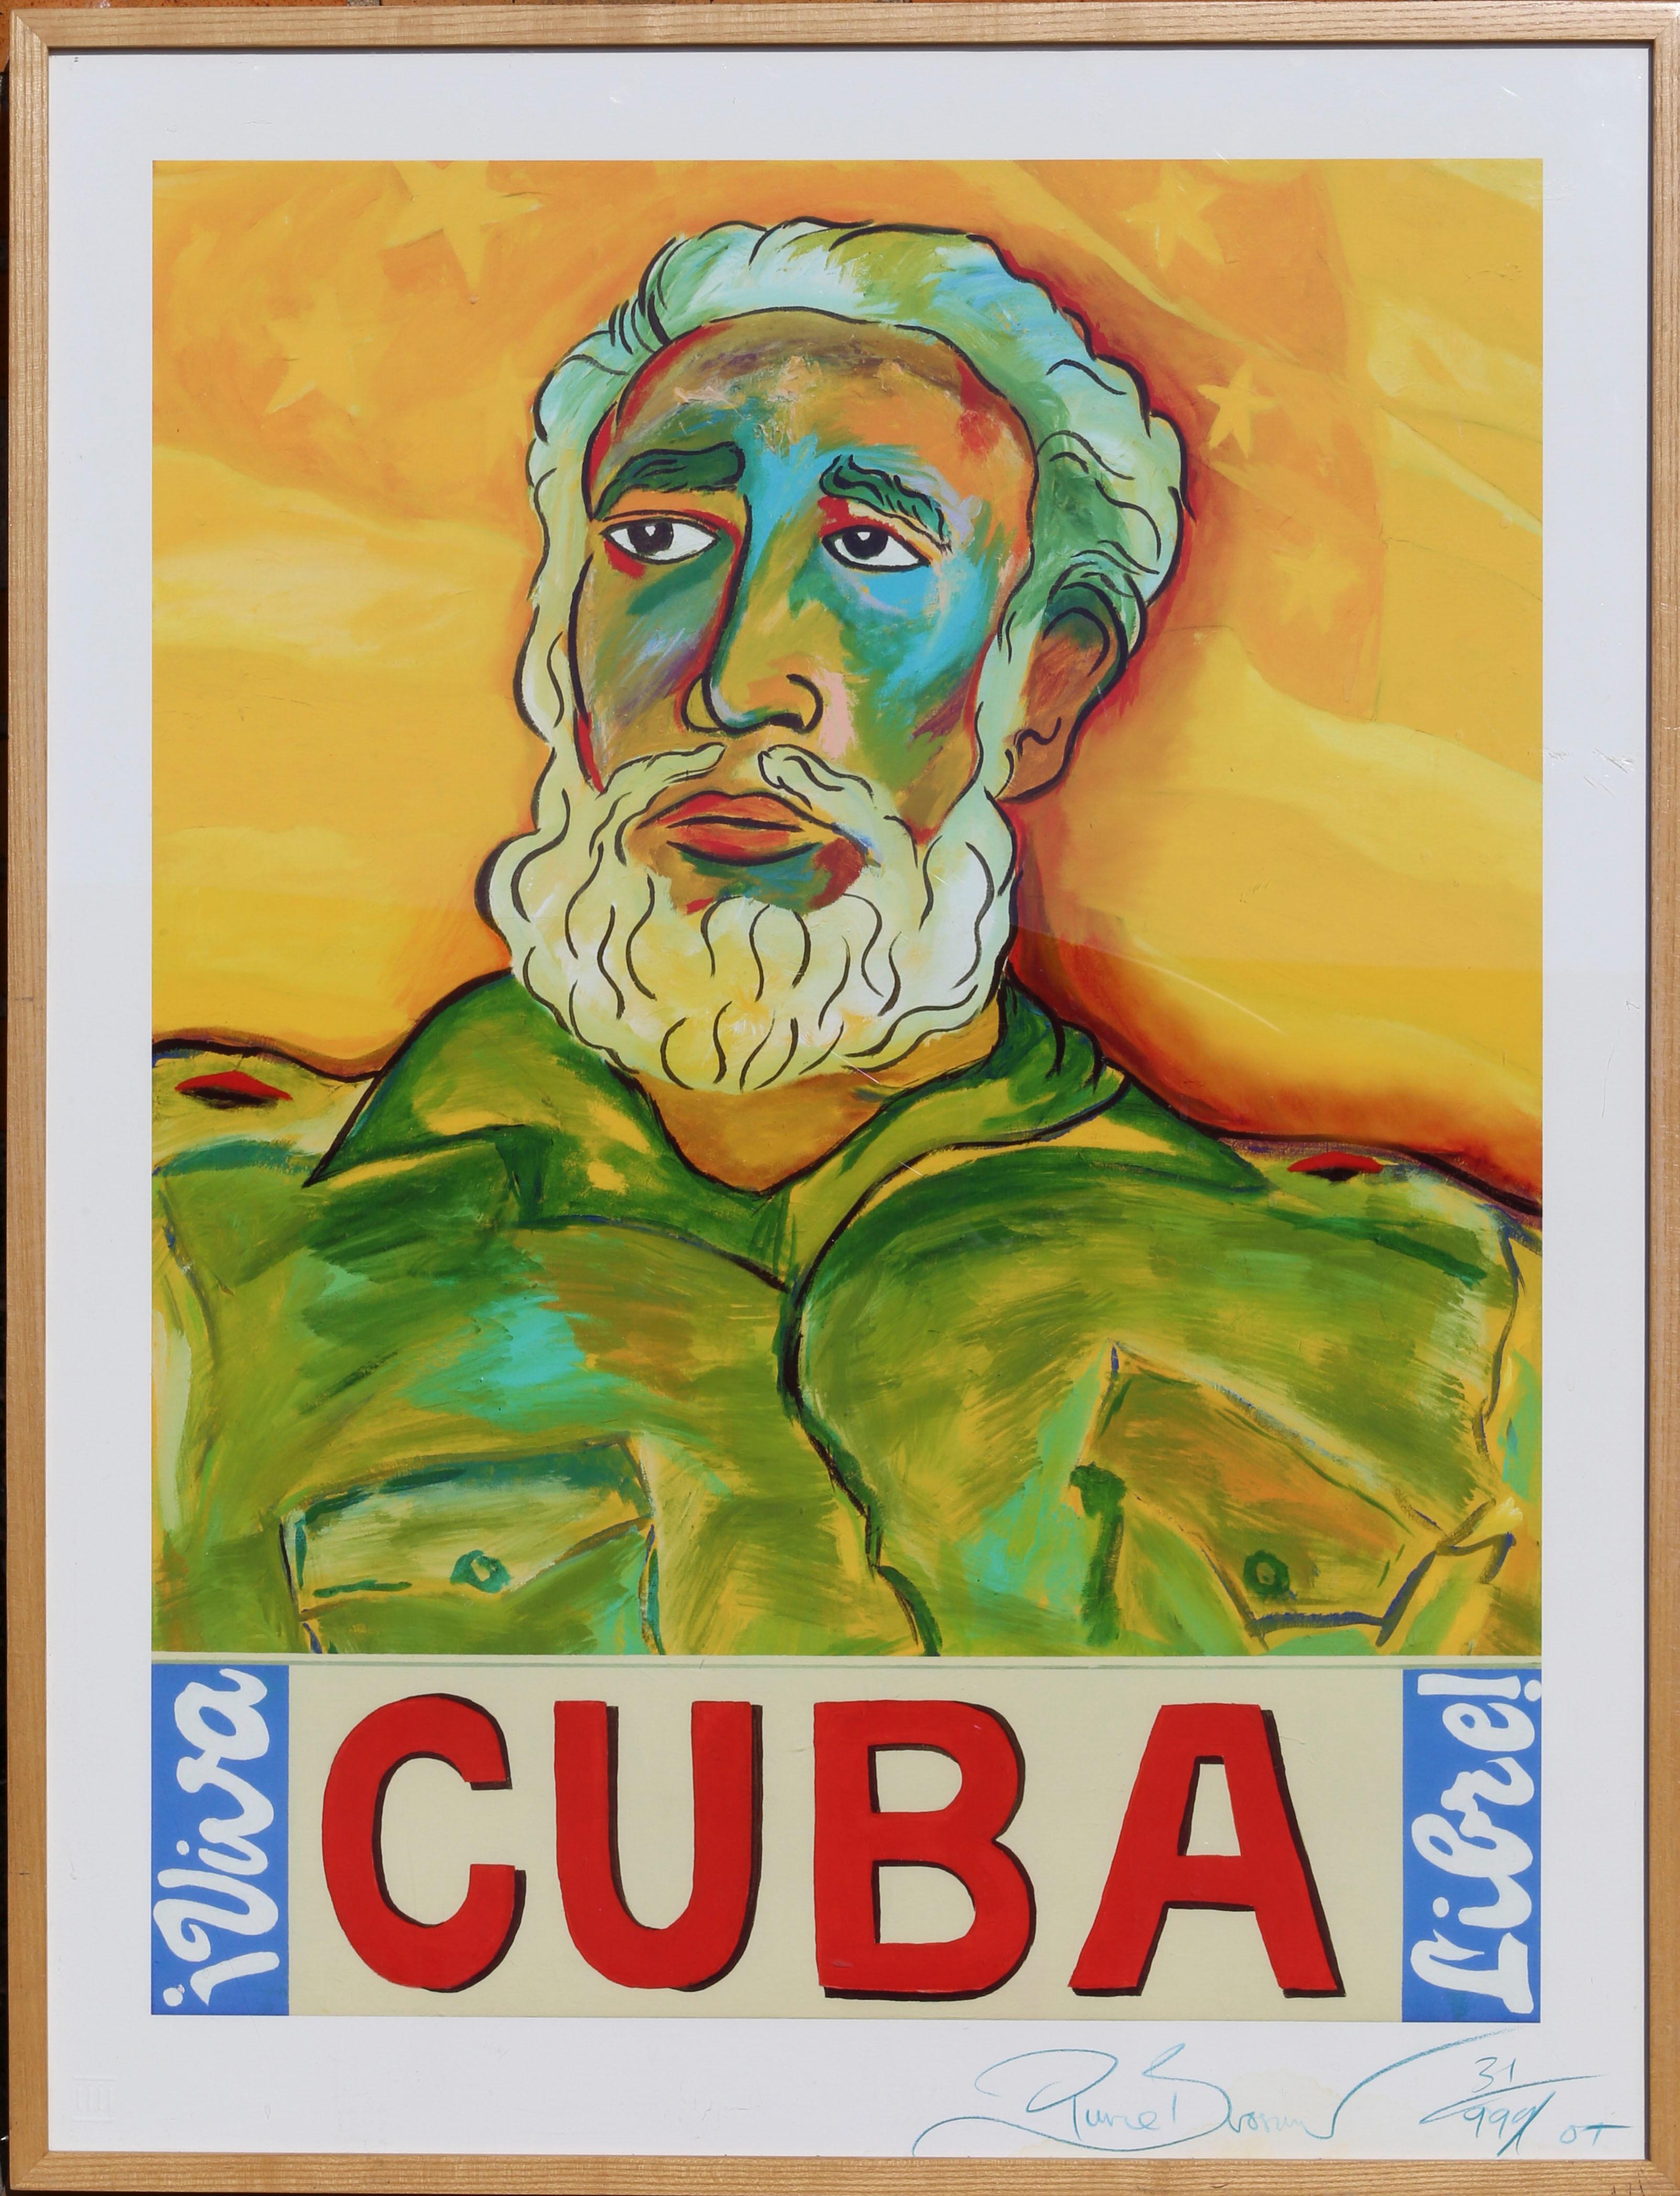 "Castro was on the cover of 'Cigar Aficionado'. I painted his head and torso really fast, and it stayed like that for nearly 2 years until Keely fell in love with it. Then later we traveled to Cuba, and one day she stood by this wall that was 25